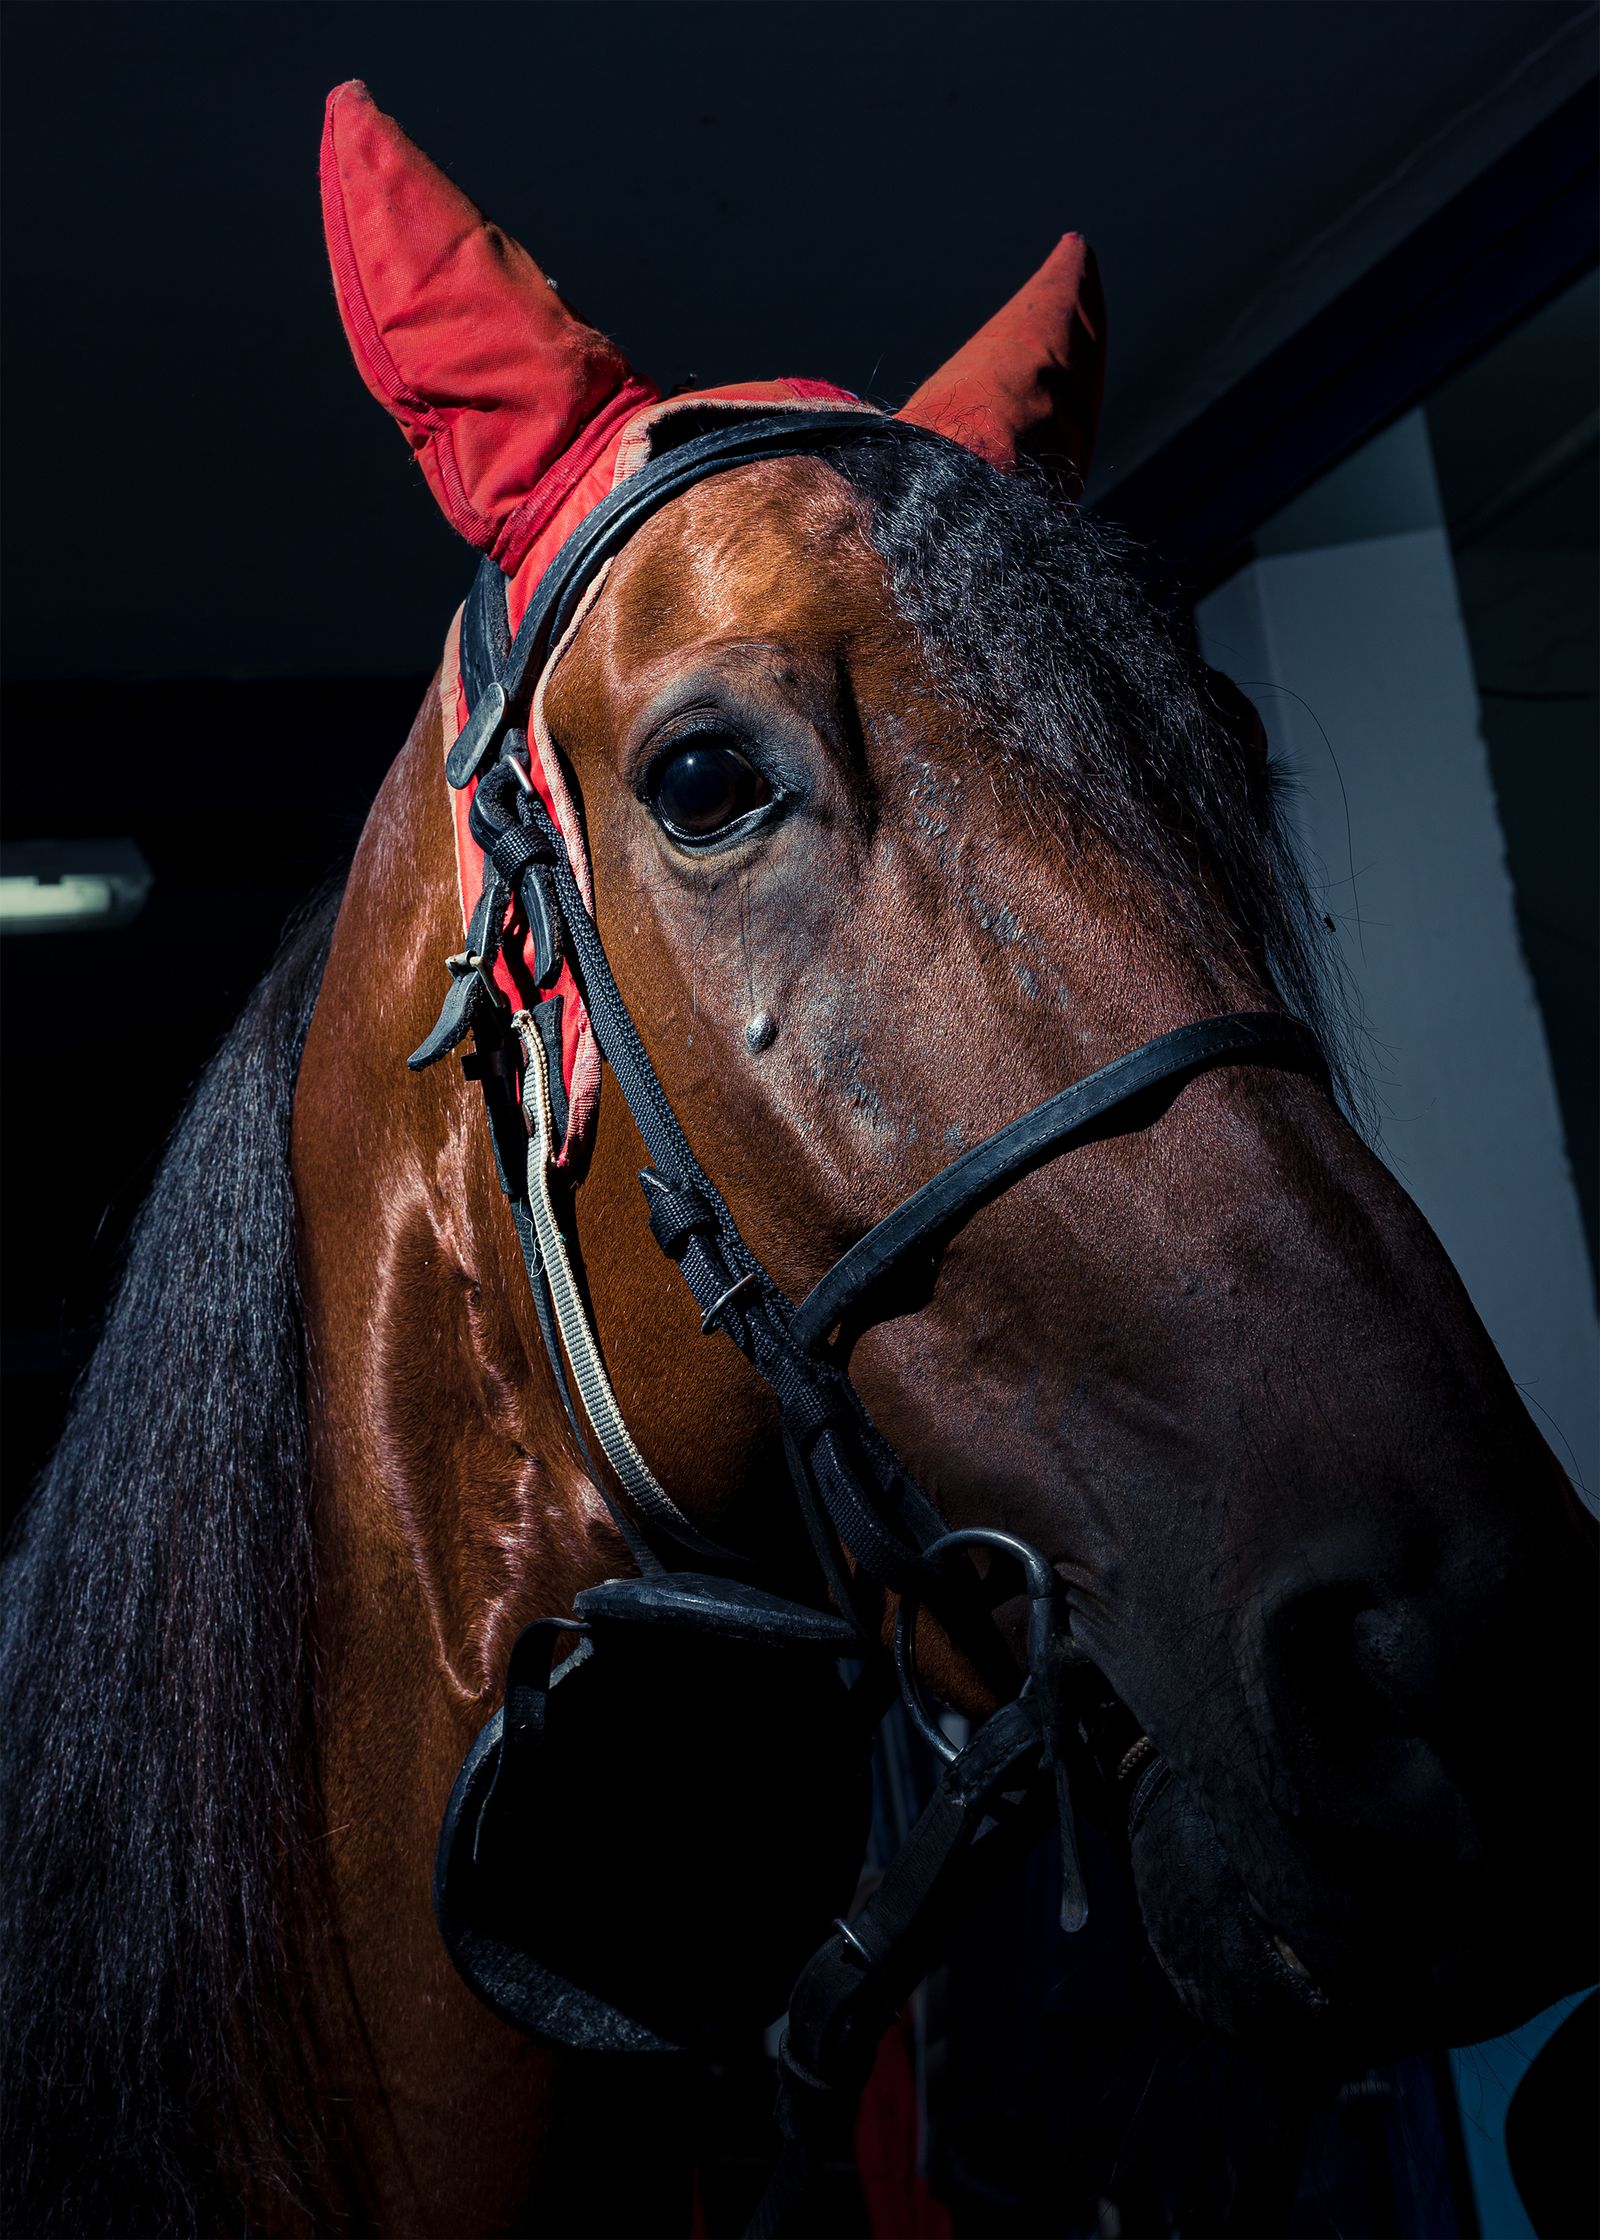 © Alessio Pellicoro - A particular detail of the horse's competition equipment.